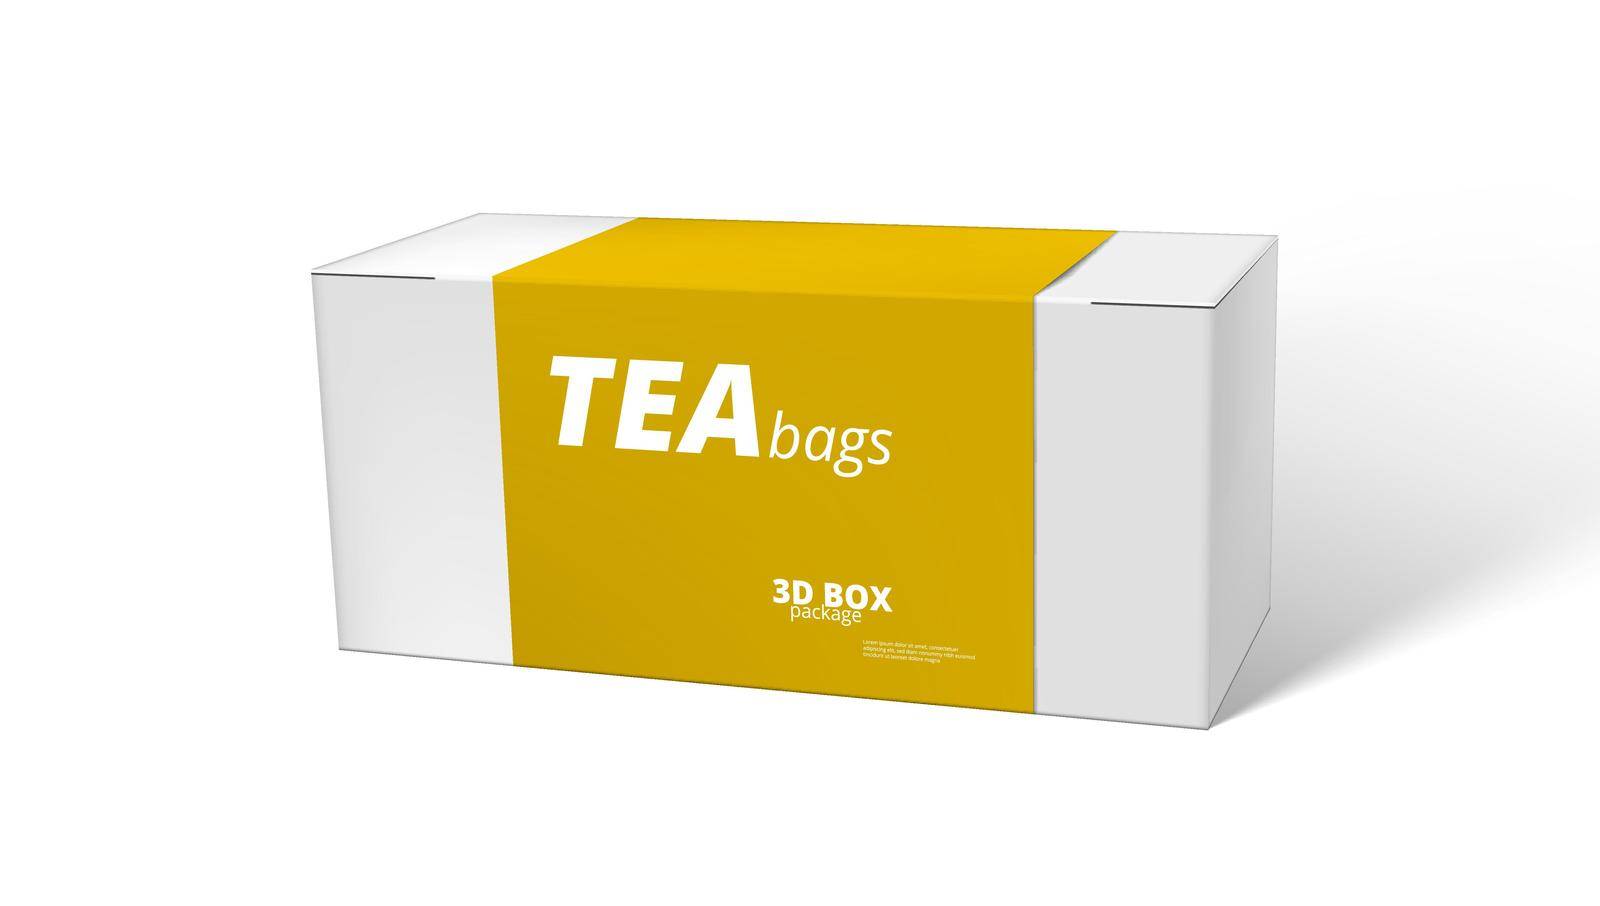 Clear White Box For Tea Bags With Yellow Label by VectorThings